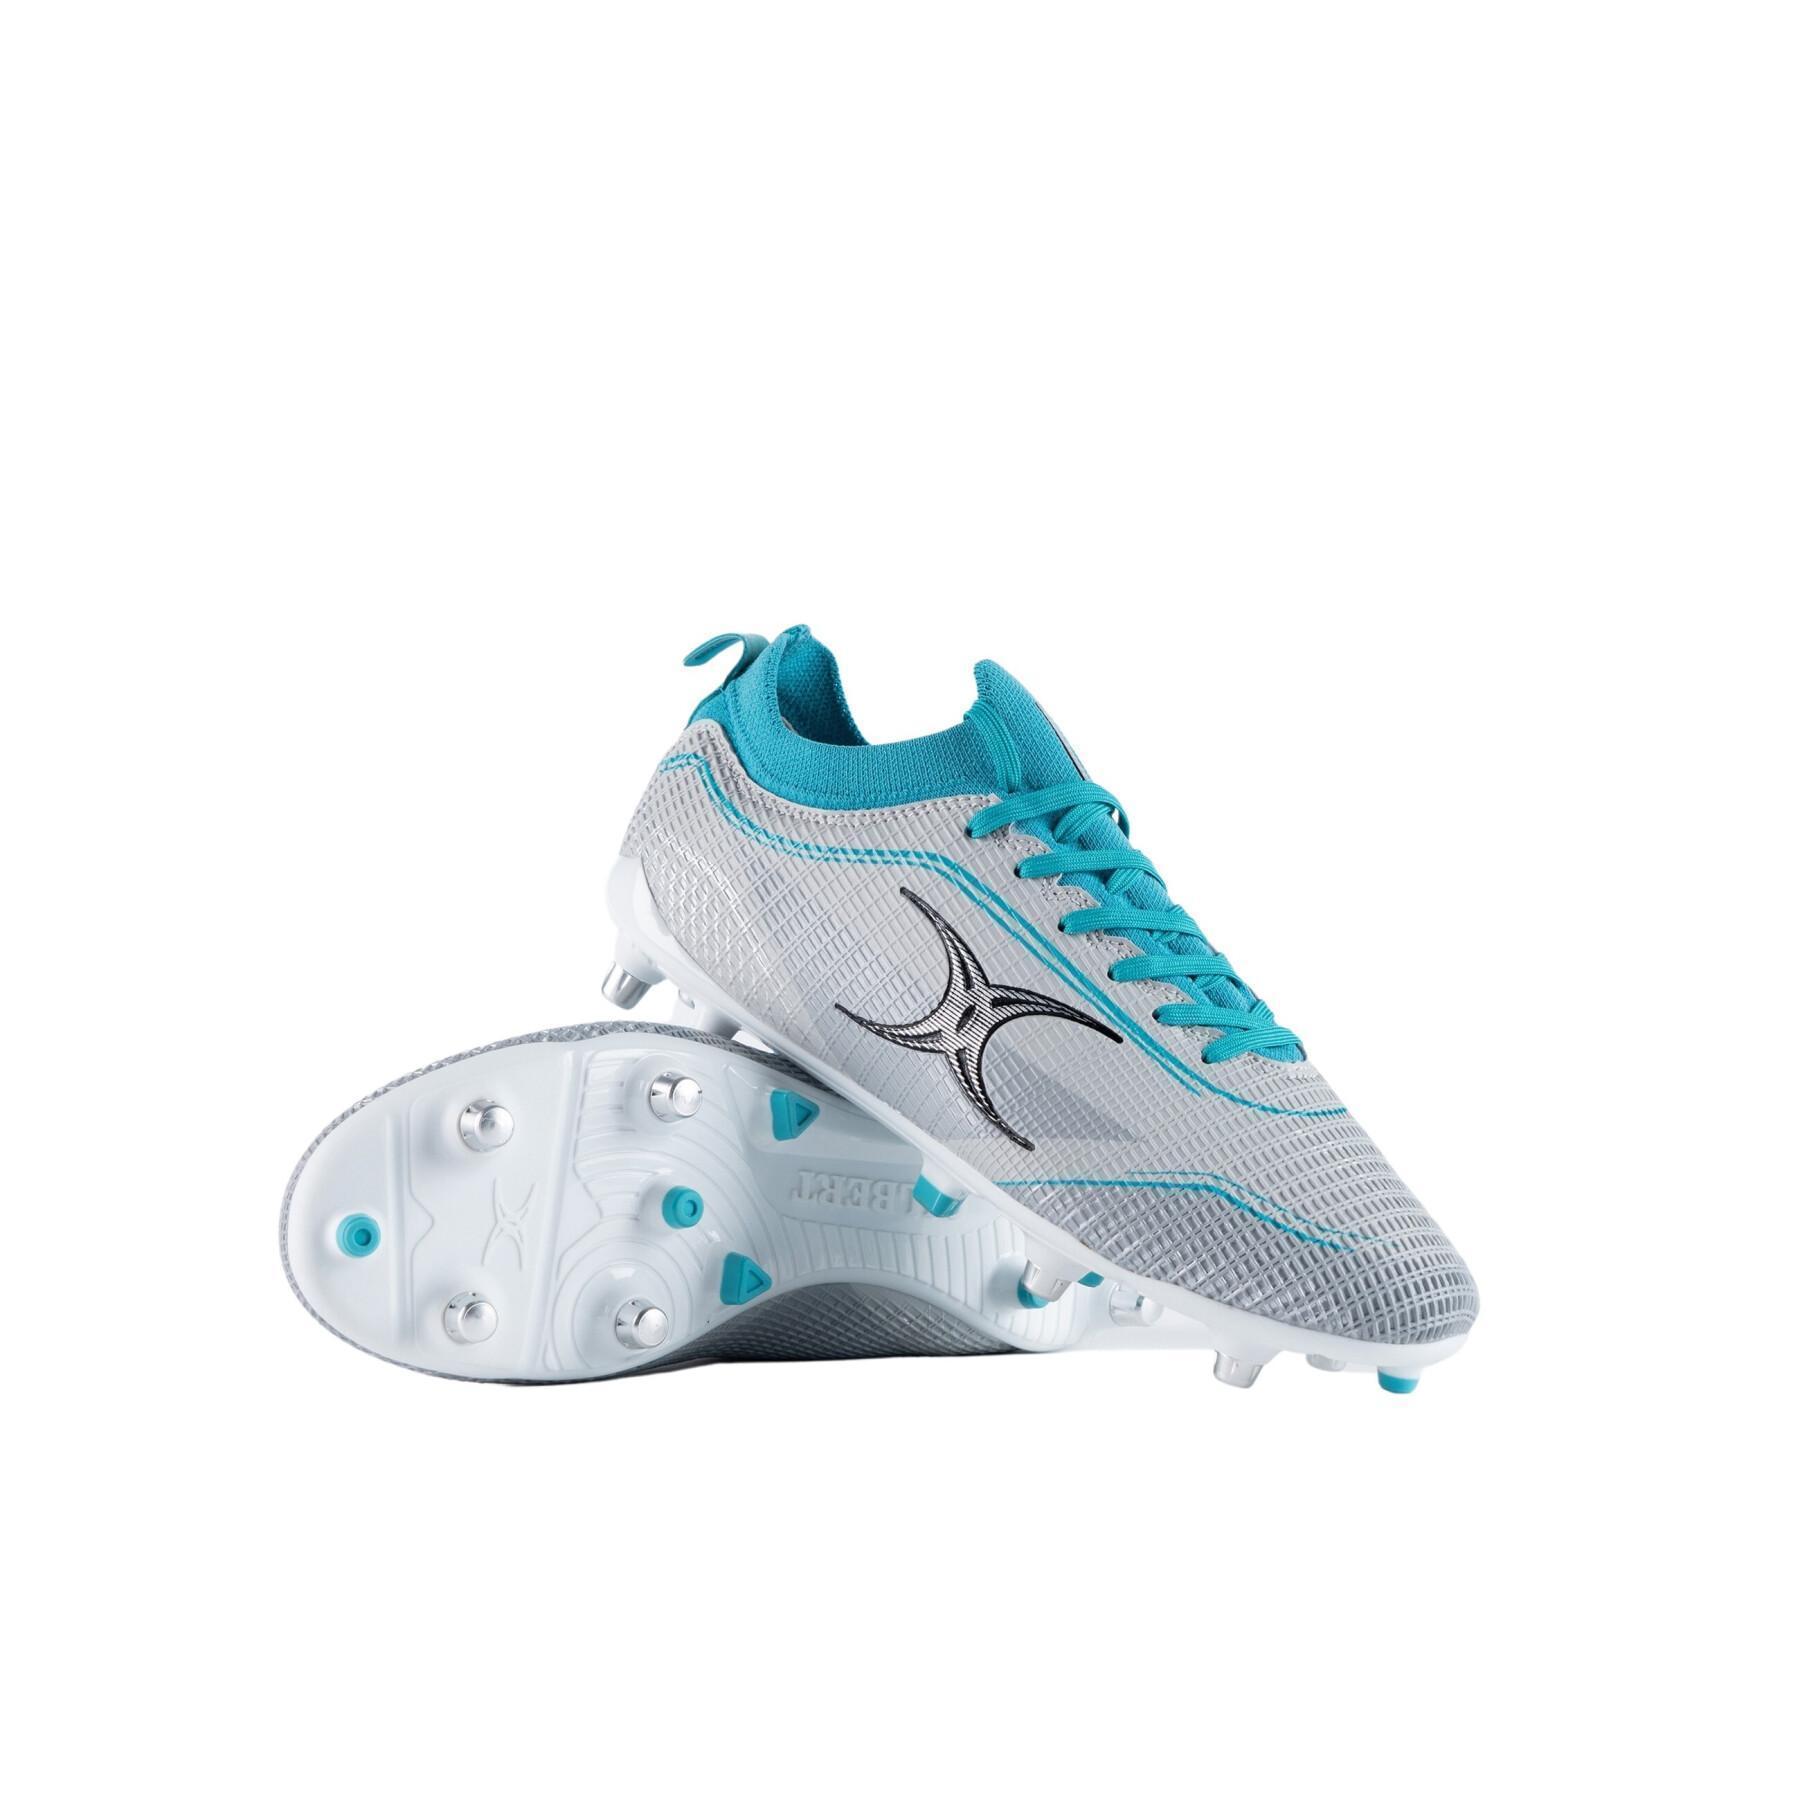 Sapatos de Rugby Gilbert Cage Pace 6S